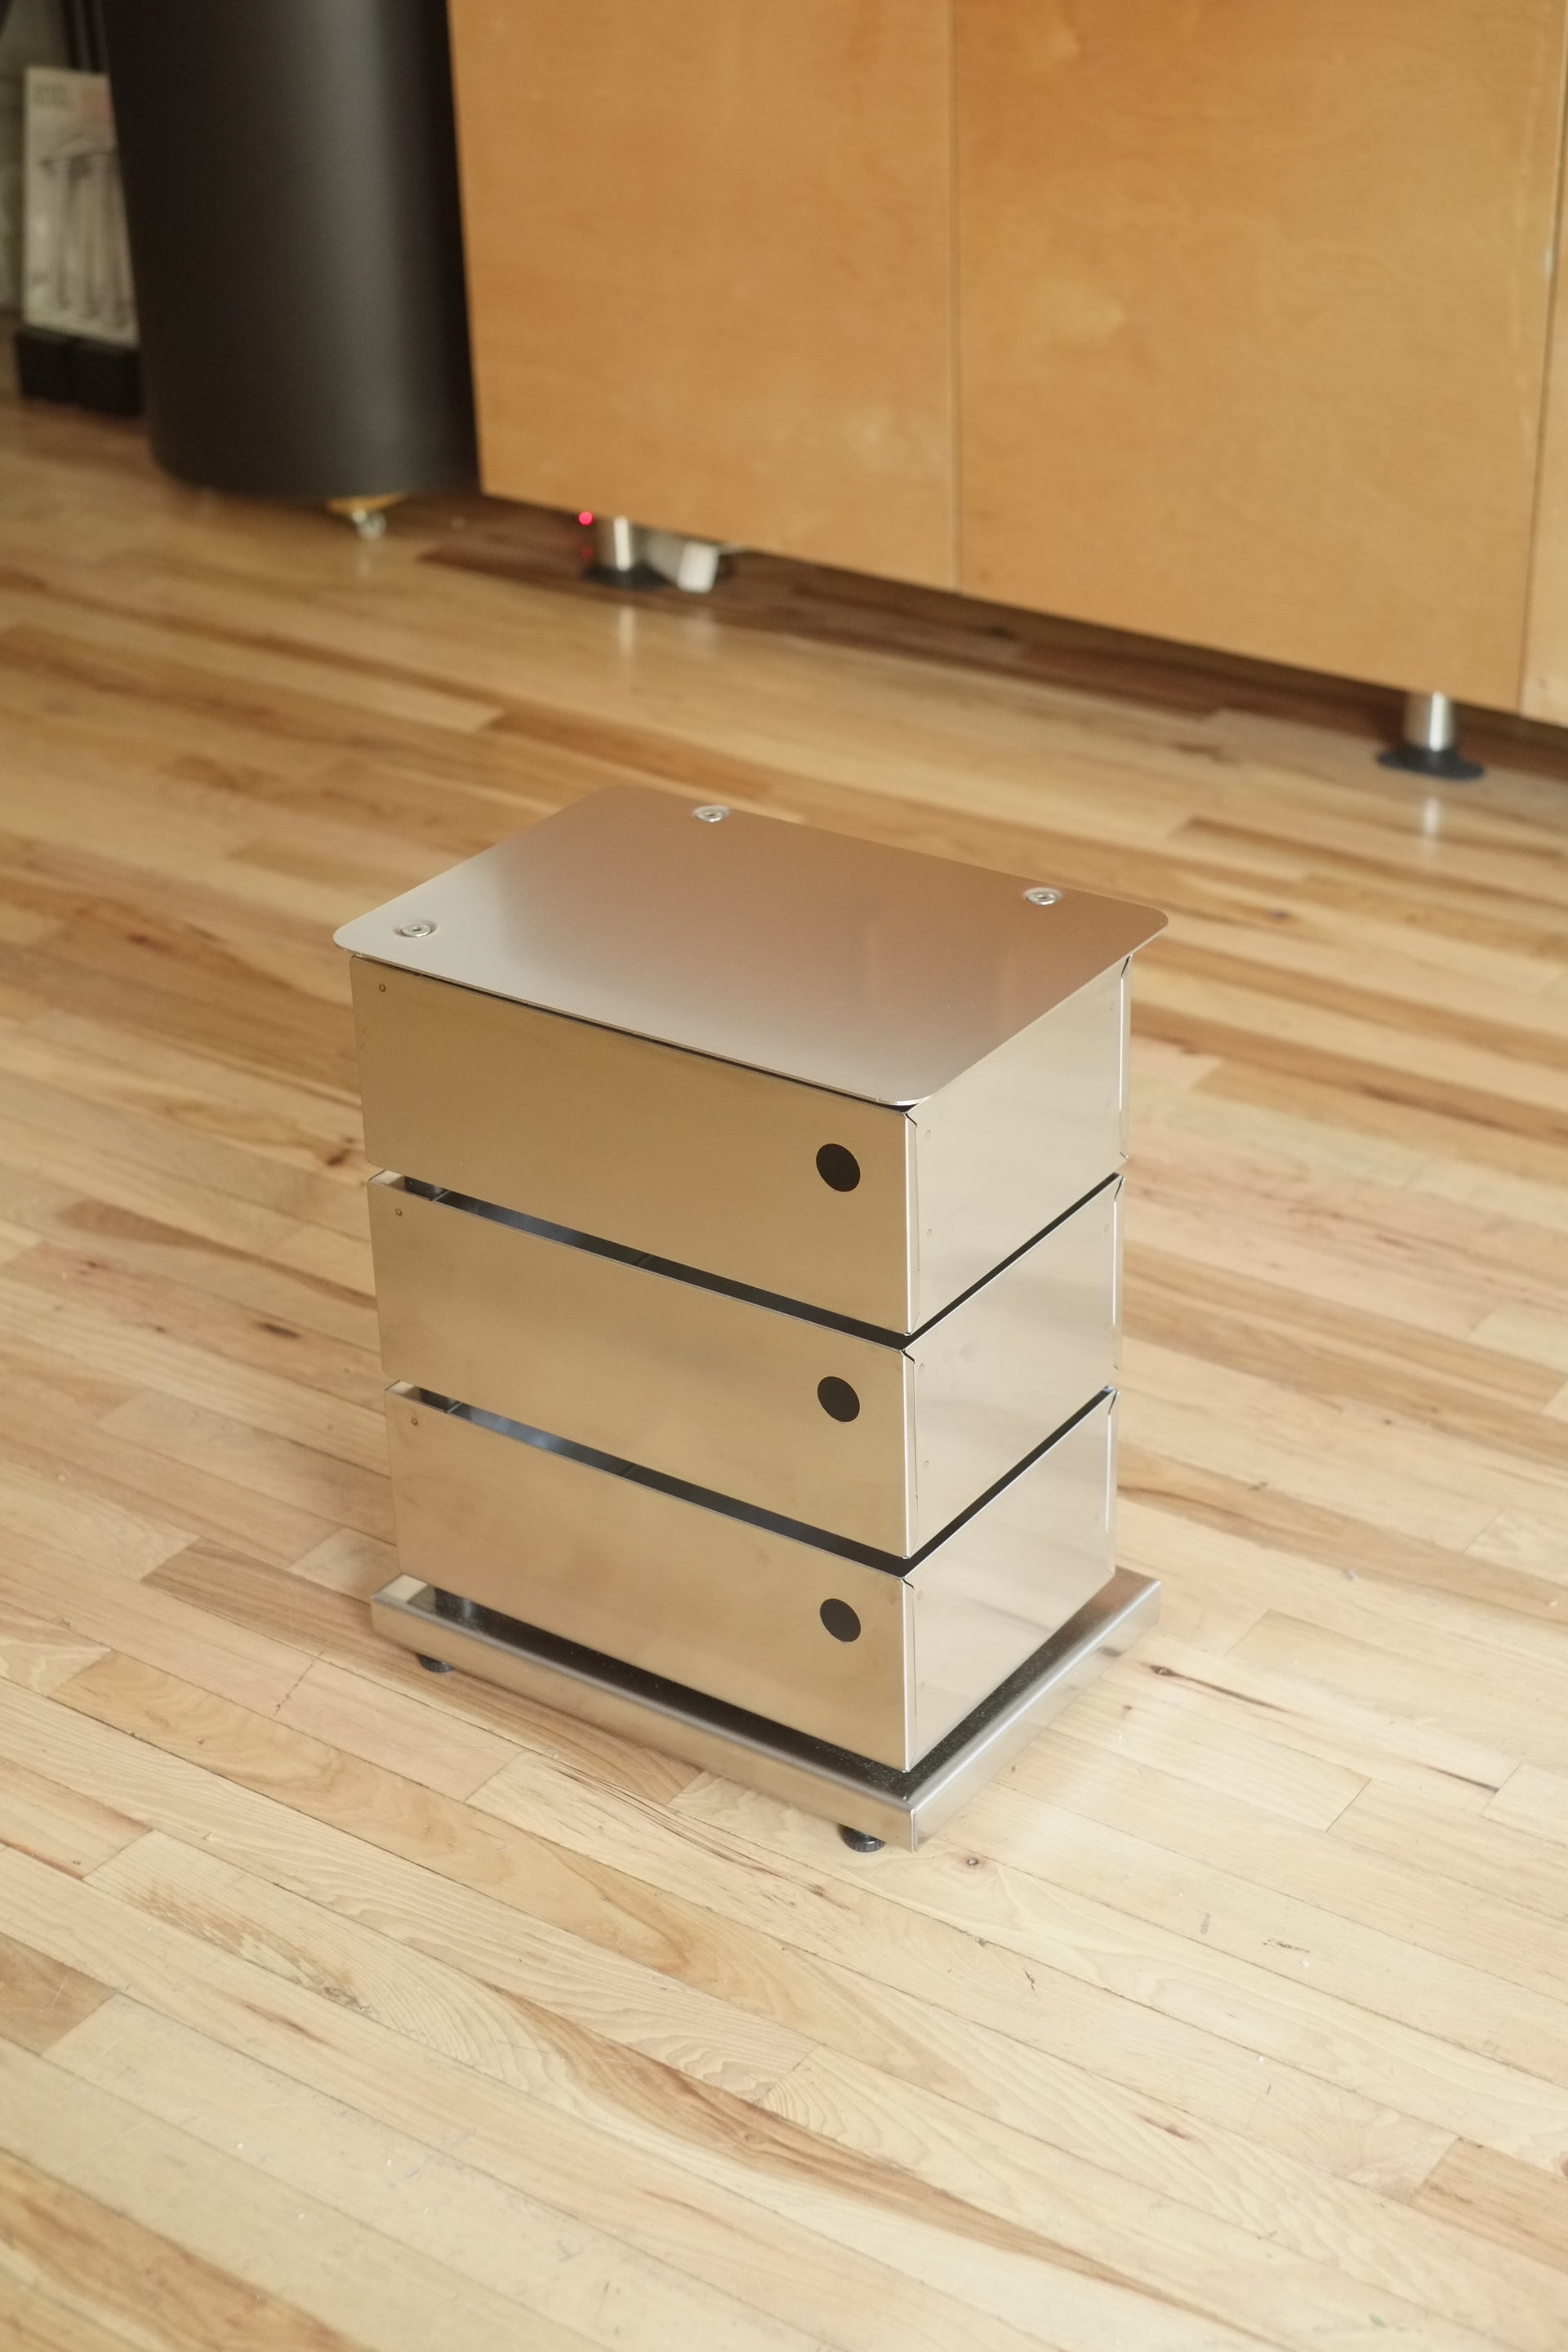 3-Drawer Pivot Cabinet (Stainless Steel)